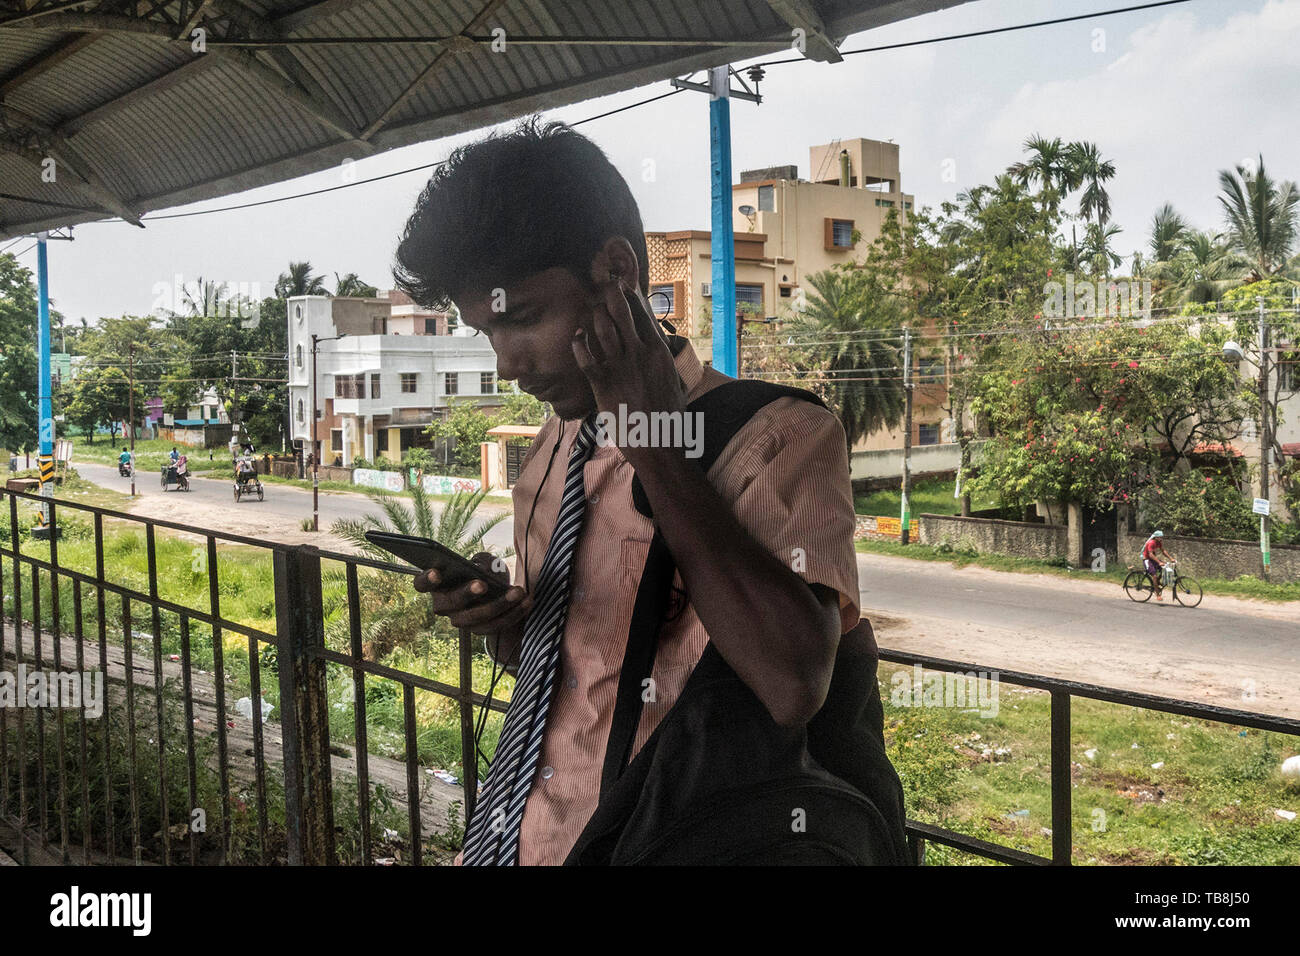 Kolkata. 30th May, 2019. A man checks mobile phone in Kolkata, India on May 30, 2019. Over years, fake news have emerged as a big challenge in India both for the government and the civil society, even as it led to violence and tension in the society, at times even killings. TO GO WITH Spotlight: Fake News in social media big challenge in India Credit: Tumpa Mondal/Xinhua/Alamy Live News Stock Photo